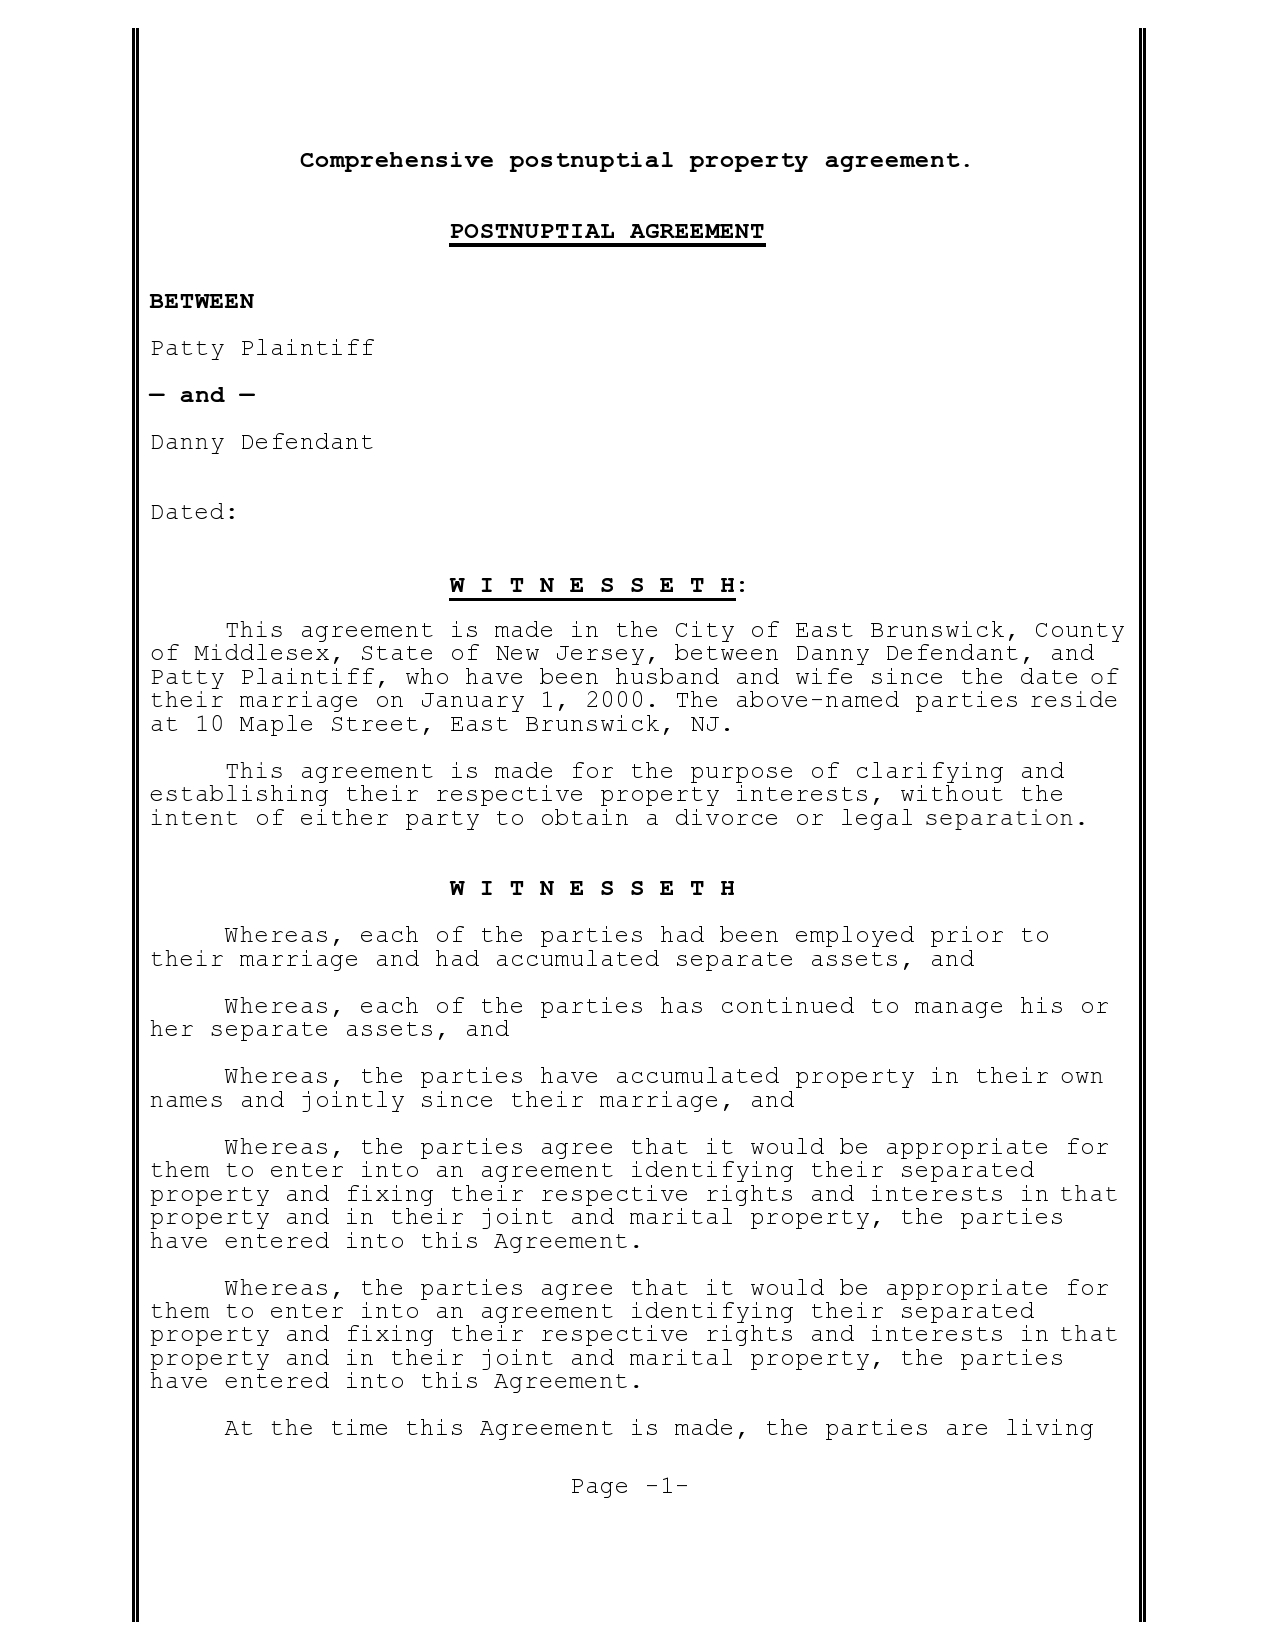 Free postnuptial agreement template 10